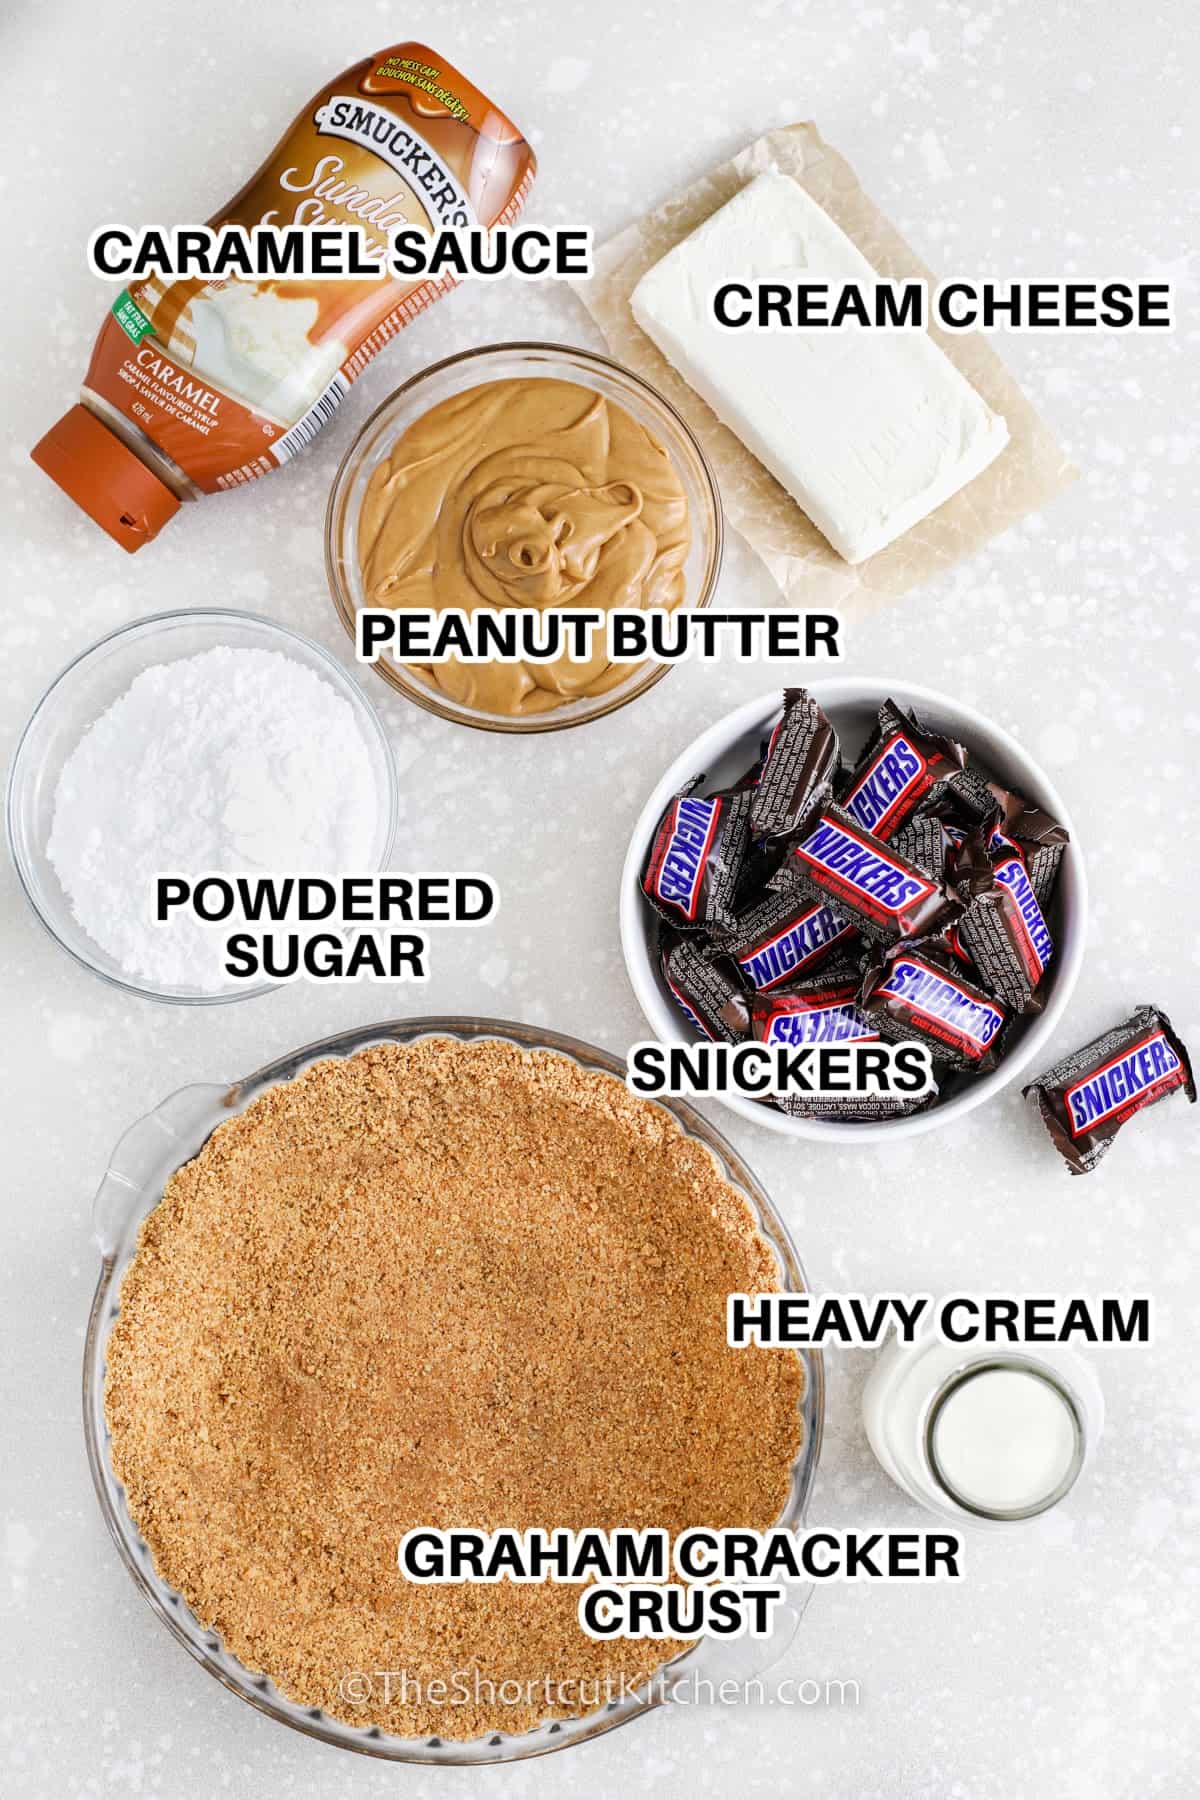 Ingredients to make Snickers Pie labeled: cream cheese, caramel sauce, peanut butter, powdered sugar, snickers, heavy cream, and a graham cracker crust